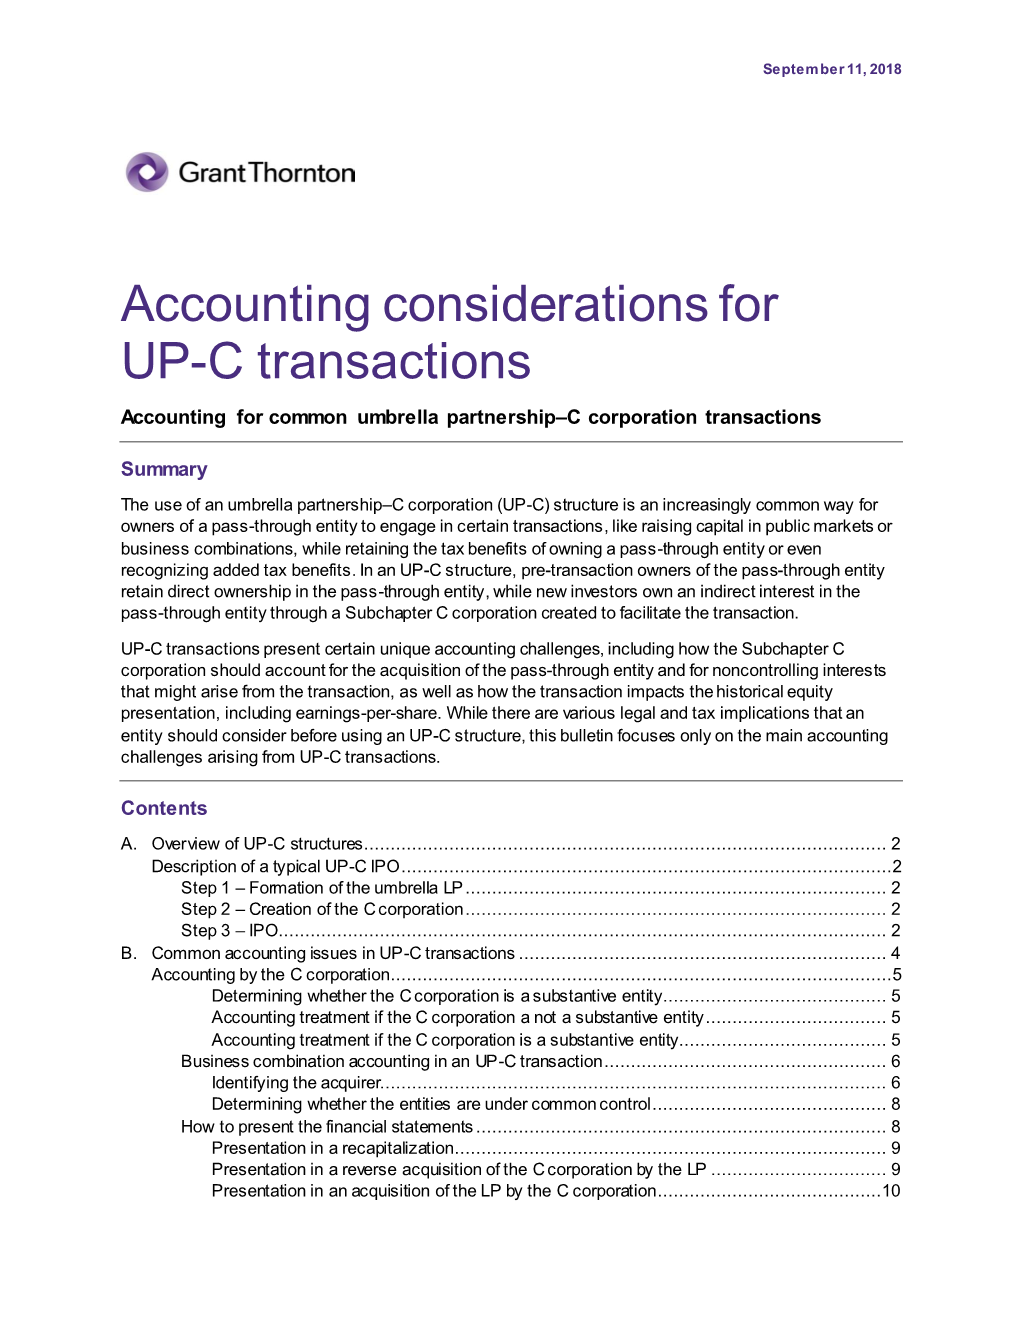 Accounting Considerations for UP-C Transactions Accounting for Common Umbrella Partnership–C Corporation Transactions